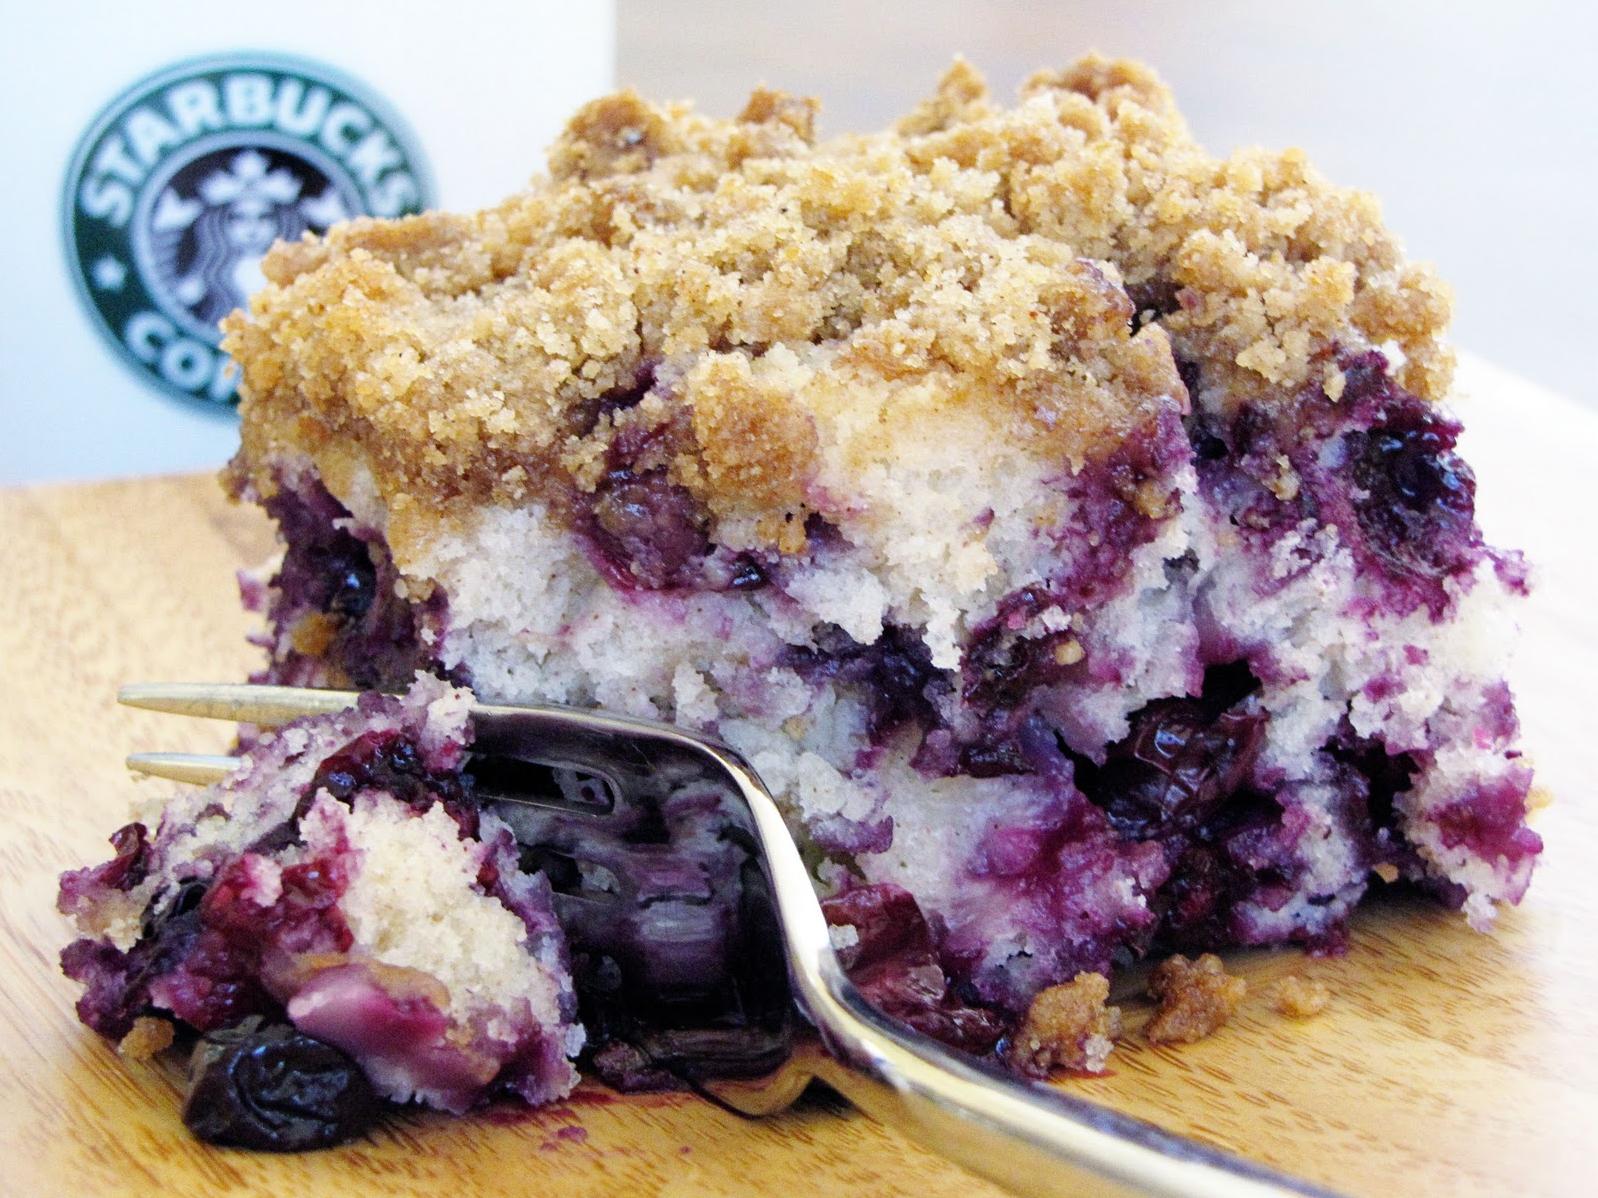  Make your morning routine special with a homemade blueberry coffee cake. 😋